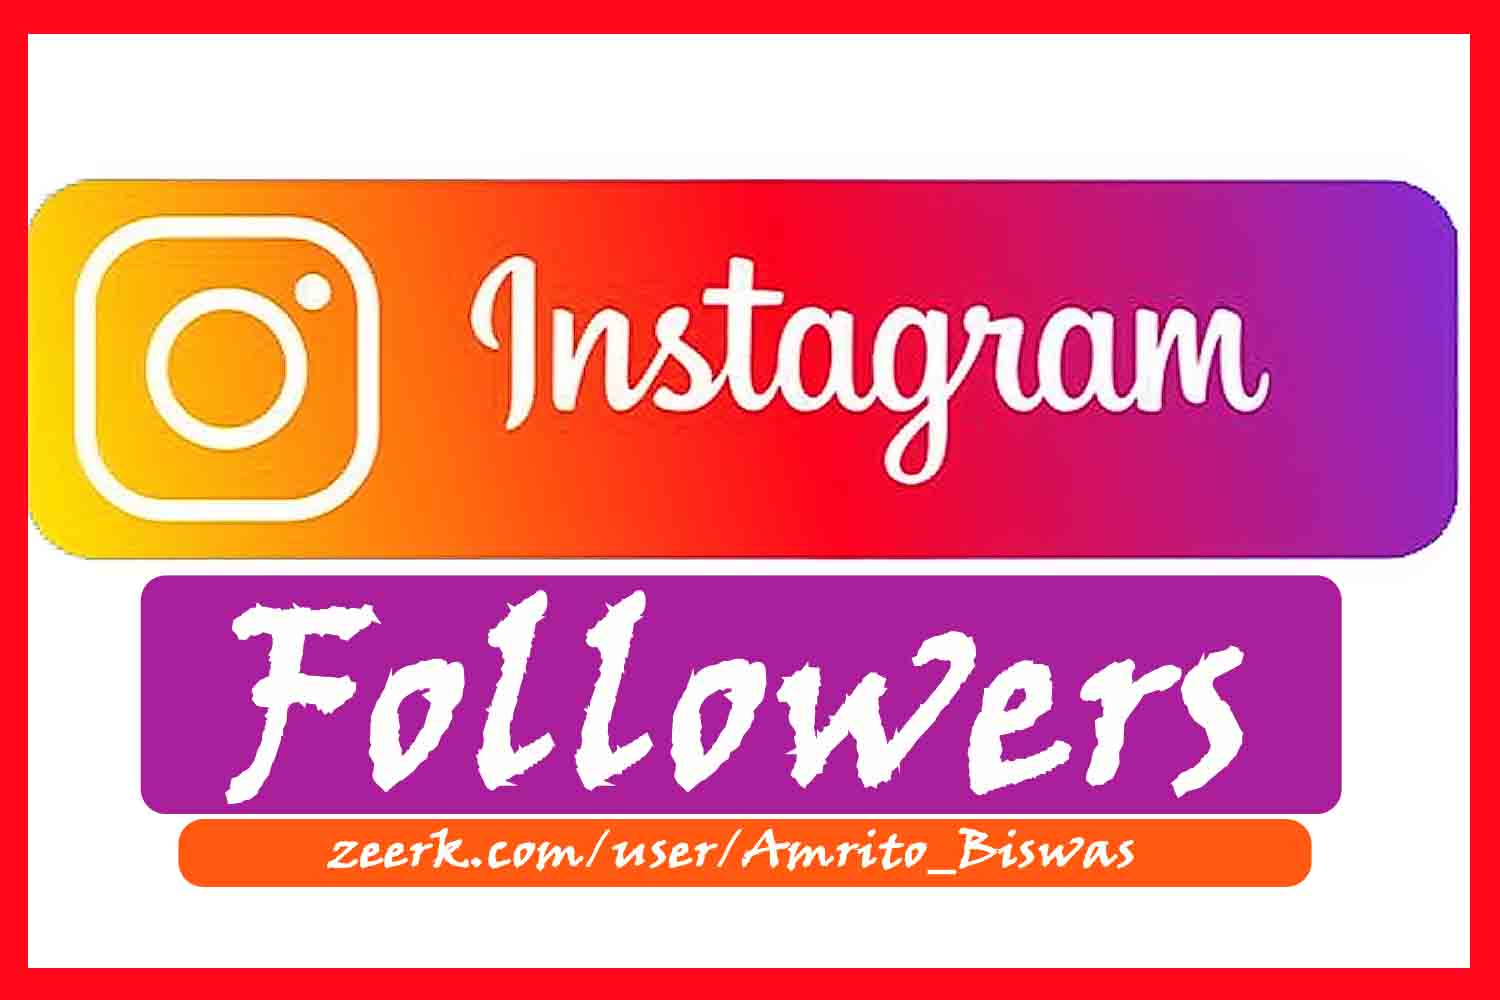 You Will get 3,000+ Instagram Real Followers, All Active User, None Dropped,100% Guarantee.